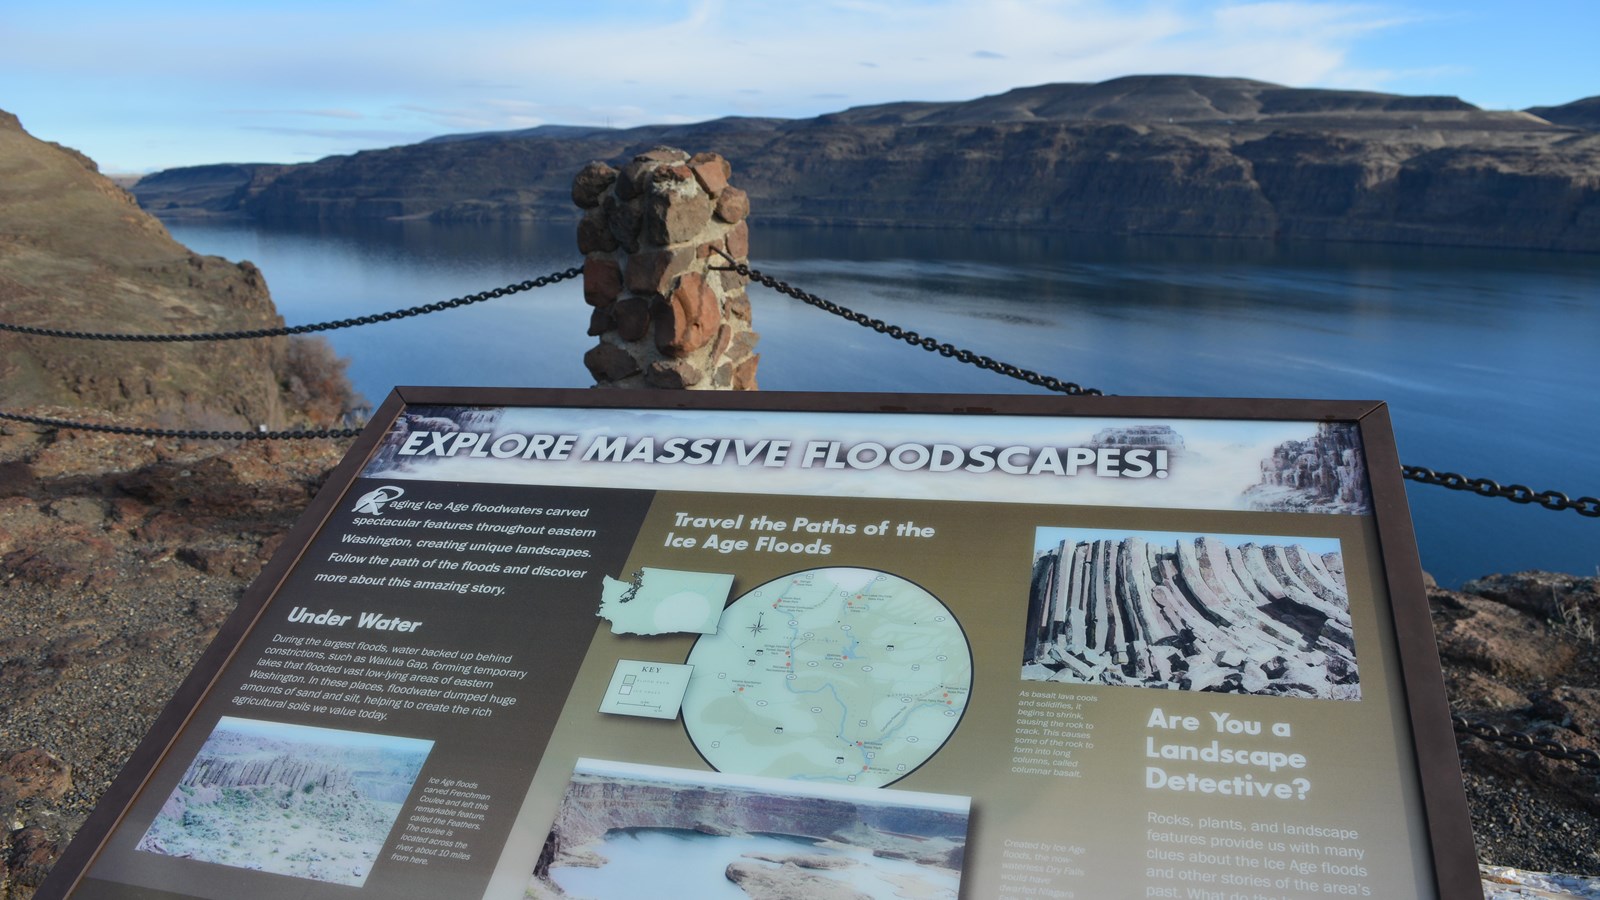 Wayside exhibit in the foreground with Columbia River in the background